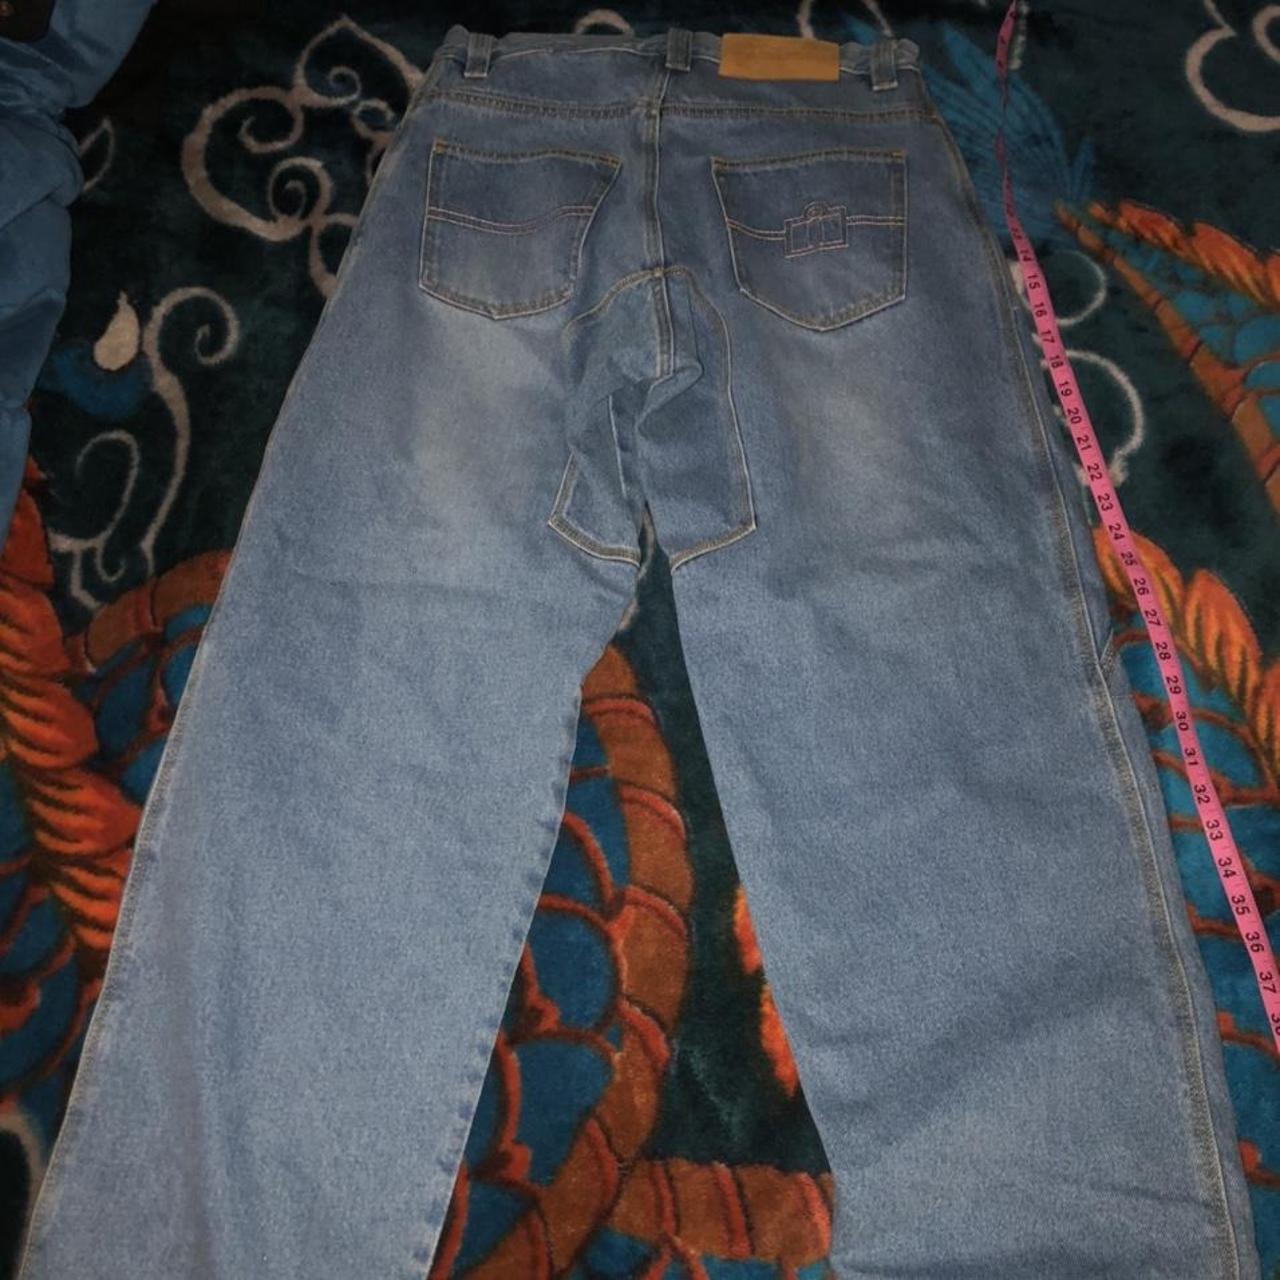 Product Image 2 - Icon jeans waist size 34.Outseam